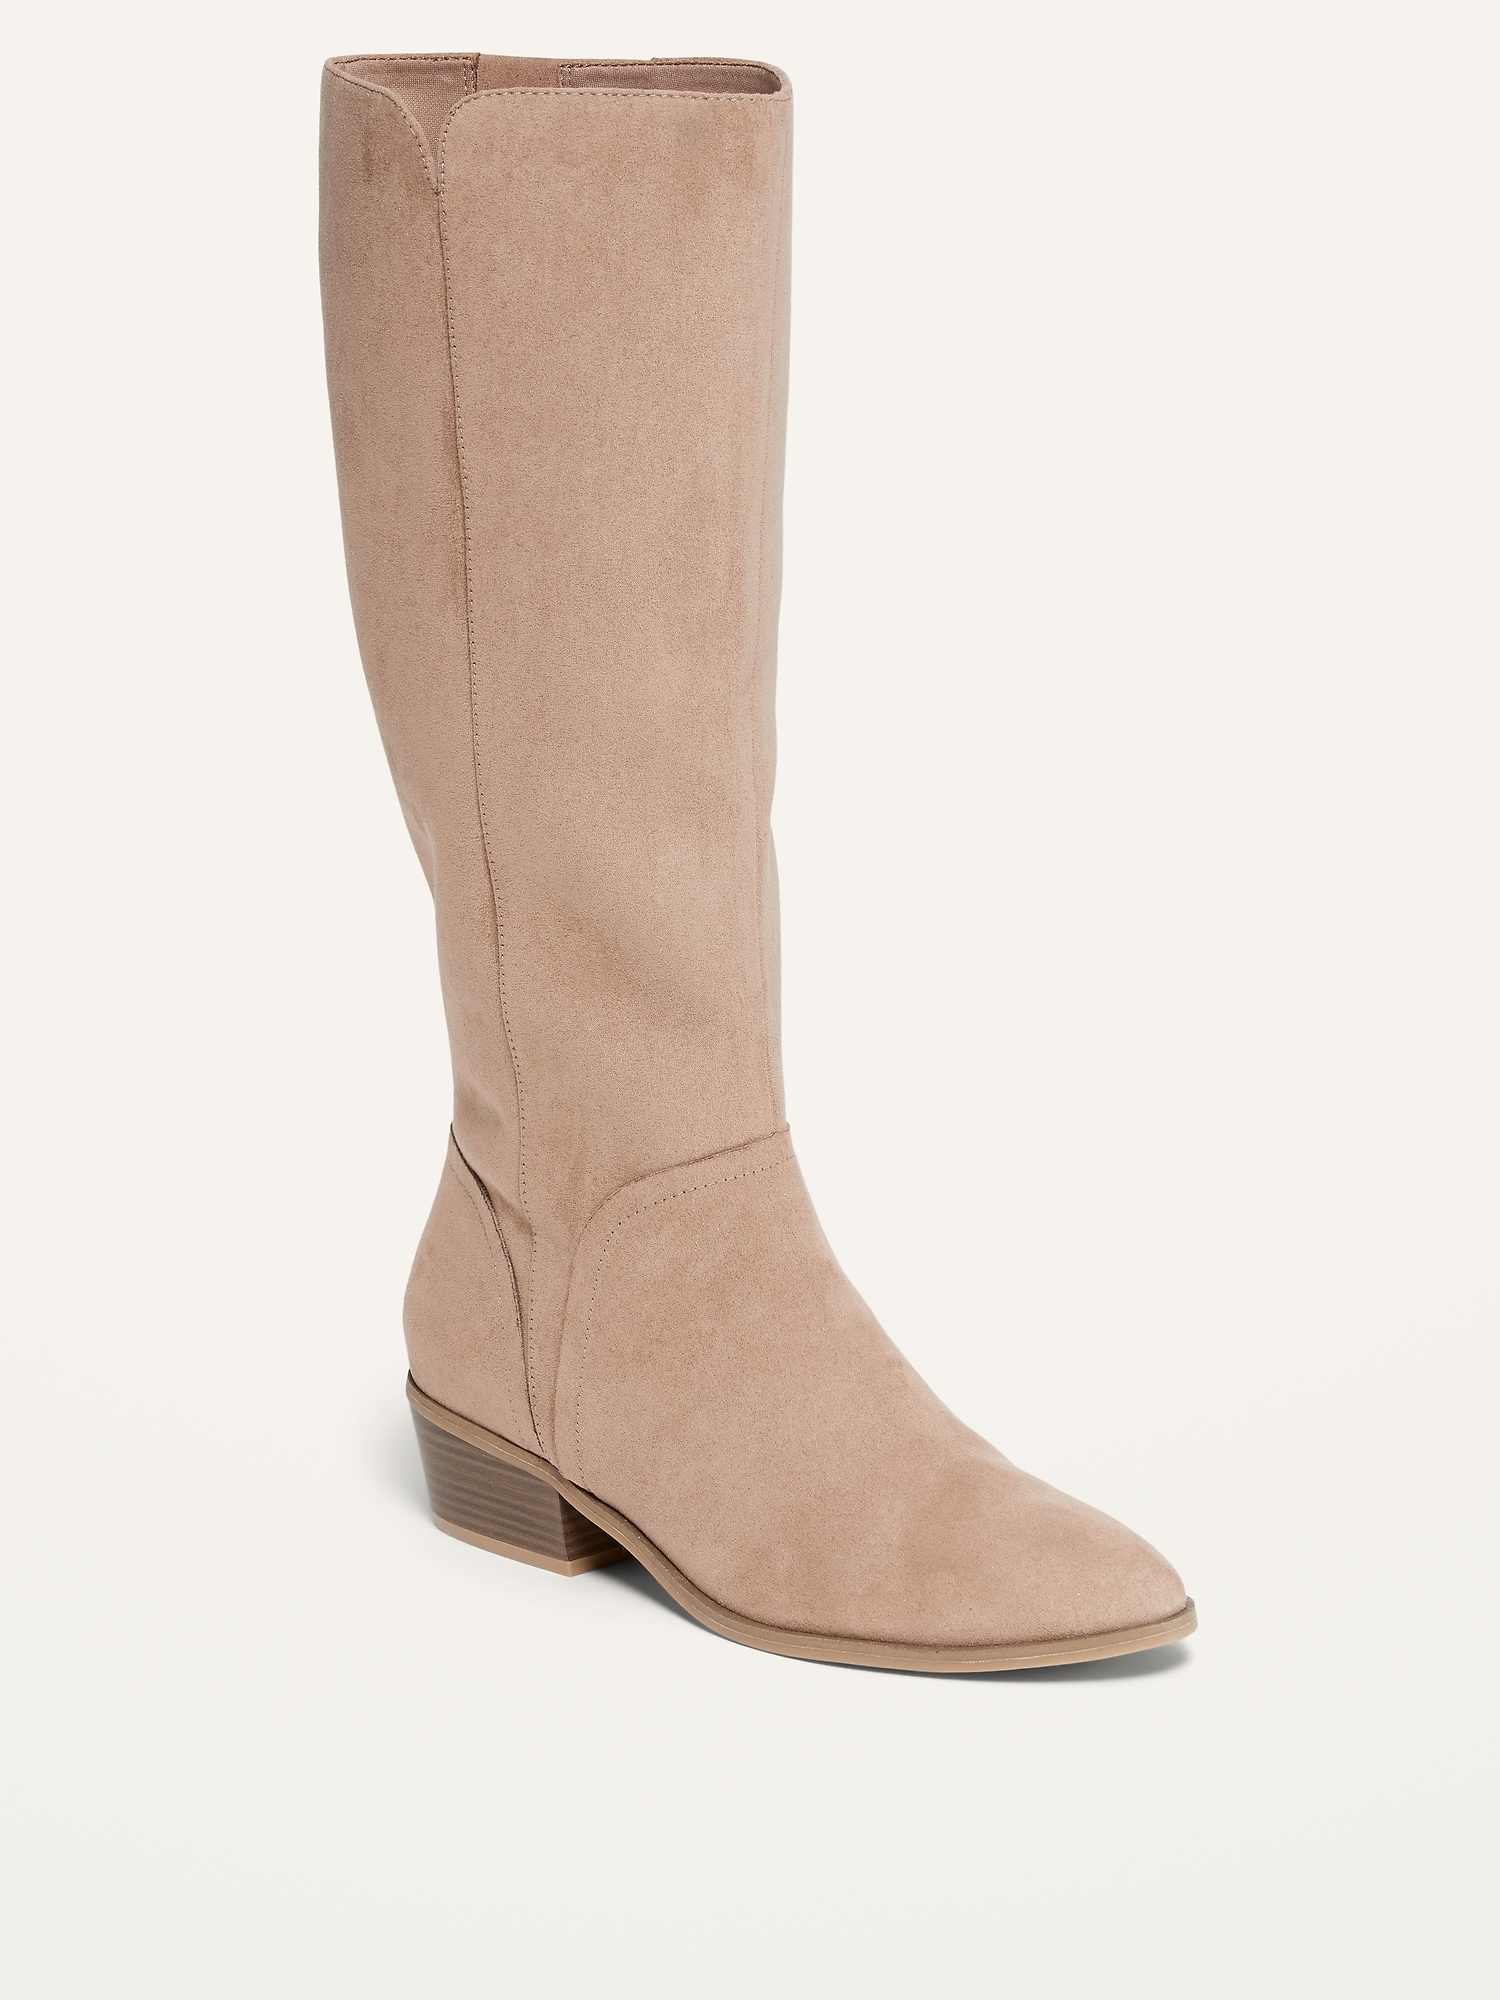 Faux-Suede Tall Boots for Women | Old Navy